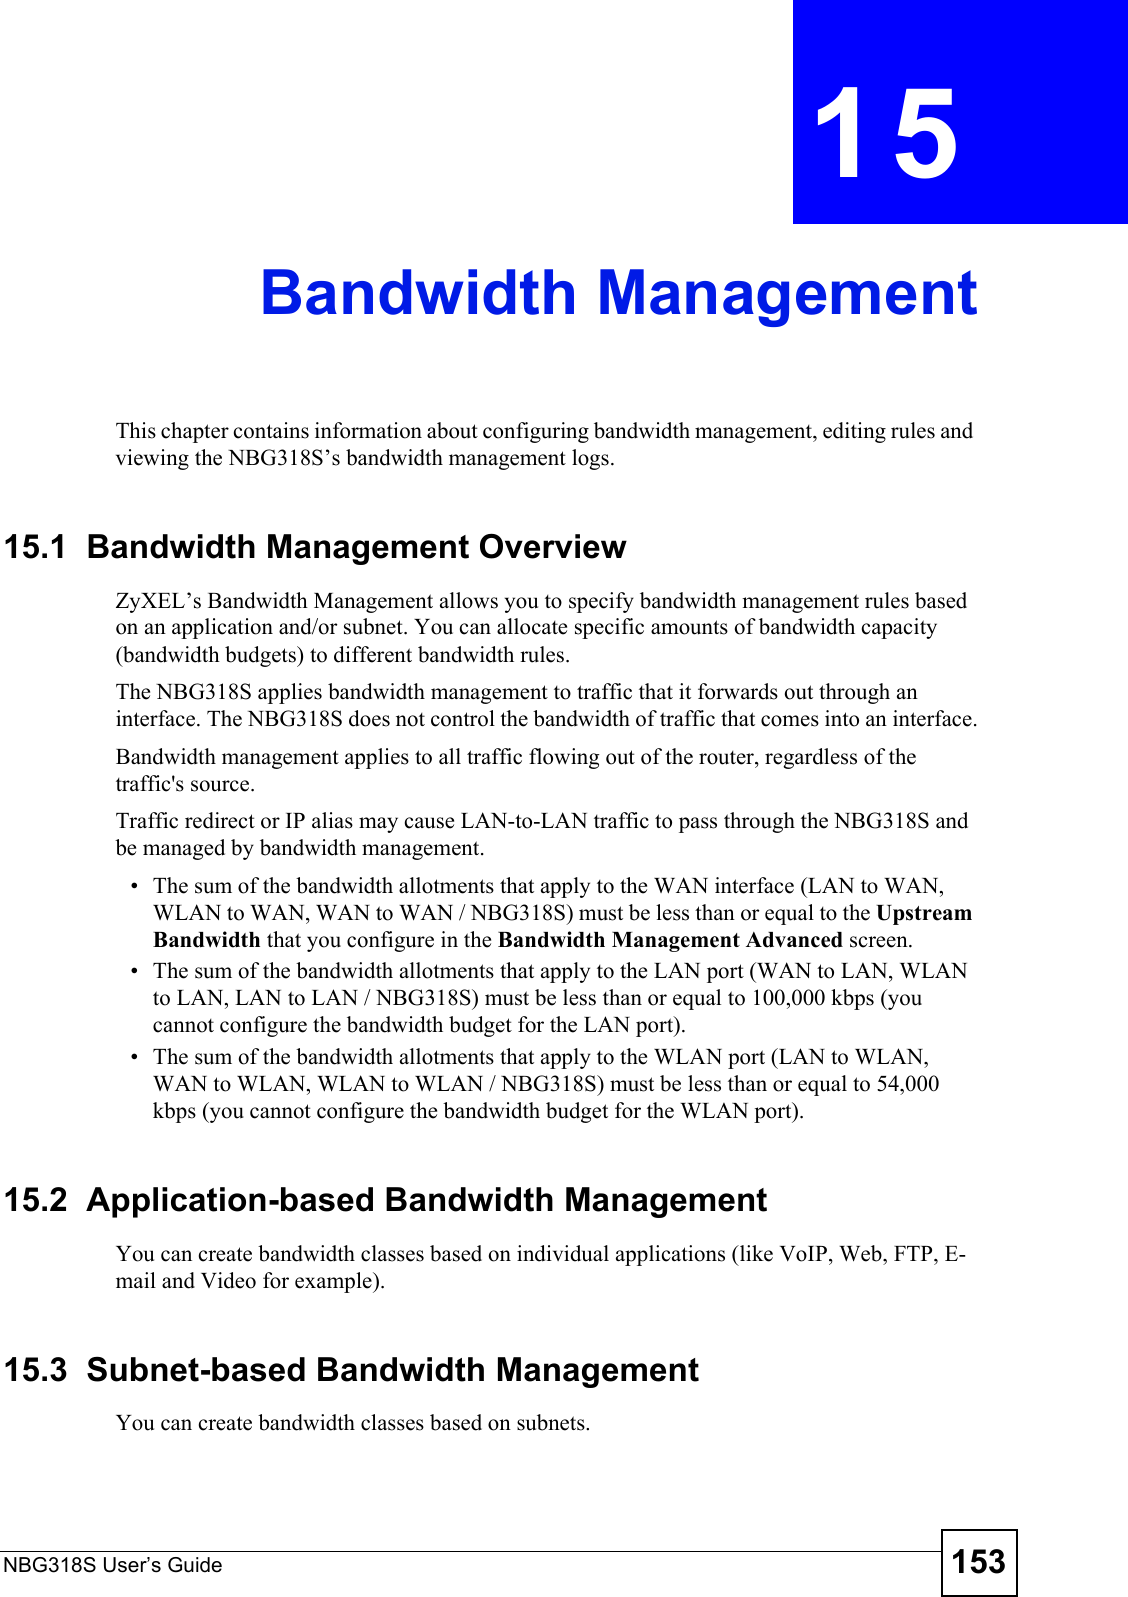 NBG318S User’s Guide 153CHAPTER  15 Bandwidth ManagementThis chapter contains information about configuring bandwidth management, editing rules and viewing the NBG318S’s bandwidth management logs.15.1  Bandwidth Management Overview ZyXEL’s Bandwidth Management allows you to specify bandwidth management rules based on an application and/or subnet. You can allocate specific amounts of bandwidth capacity (bandwidth budgets) to different bandwidth rules. The NBG318S applies bandwidth management to traffic that it forwards out through an interface. The NBG318S does not control the bandwidth of traffic that comes into an interface.Bandwidth management applies to all traffic flowing out of the router, regardless of the traffic&apos;s source.Traffic redirect or IP alias may cause LAN-to-LAN traffic to pass through the NBG318S and be managed by bandwidth management. • The sum of the bandwidth allotments that apply to the WAN interface (LAN to WAN, WLAN to WAN, WAN to WAN / NBG318S) must be less than or equal to the Upstream Bandwidth that you configure in the Bandwidth Management Advanced screen. • The sum of the bandwidth allotments that apply to the LAN port (WAN to LAN, WLAN to LAN, LAN to LAN / NBG318S) must be less than or equal to 100,000 kbps (you cannot configure the bandwidth budget for the LAN port). • The sum of the bandwidth allotments that apply to the WLAN port (LAN to WLAN, WAN to WLAN, WLAN to WLAN / NBG318S) must be less than or equal to 54,000 kbps (you cannot configure the bandwidth budget for the WLAN port). 15.2  Application-based Bandwidth ManagementYou can create bandwidth classes based on individual applications (like VoIP, Web, FTP, E-mail and Video for example).15.3  Subnet-based Bandwidth ManagementYou can create bandwidth classes based on subnets.